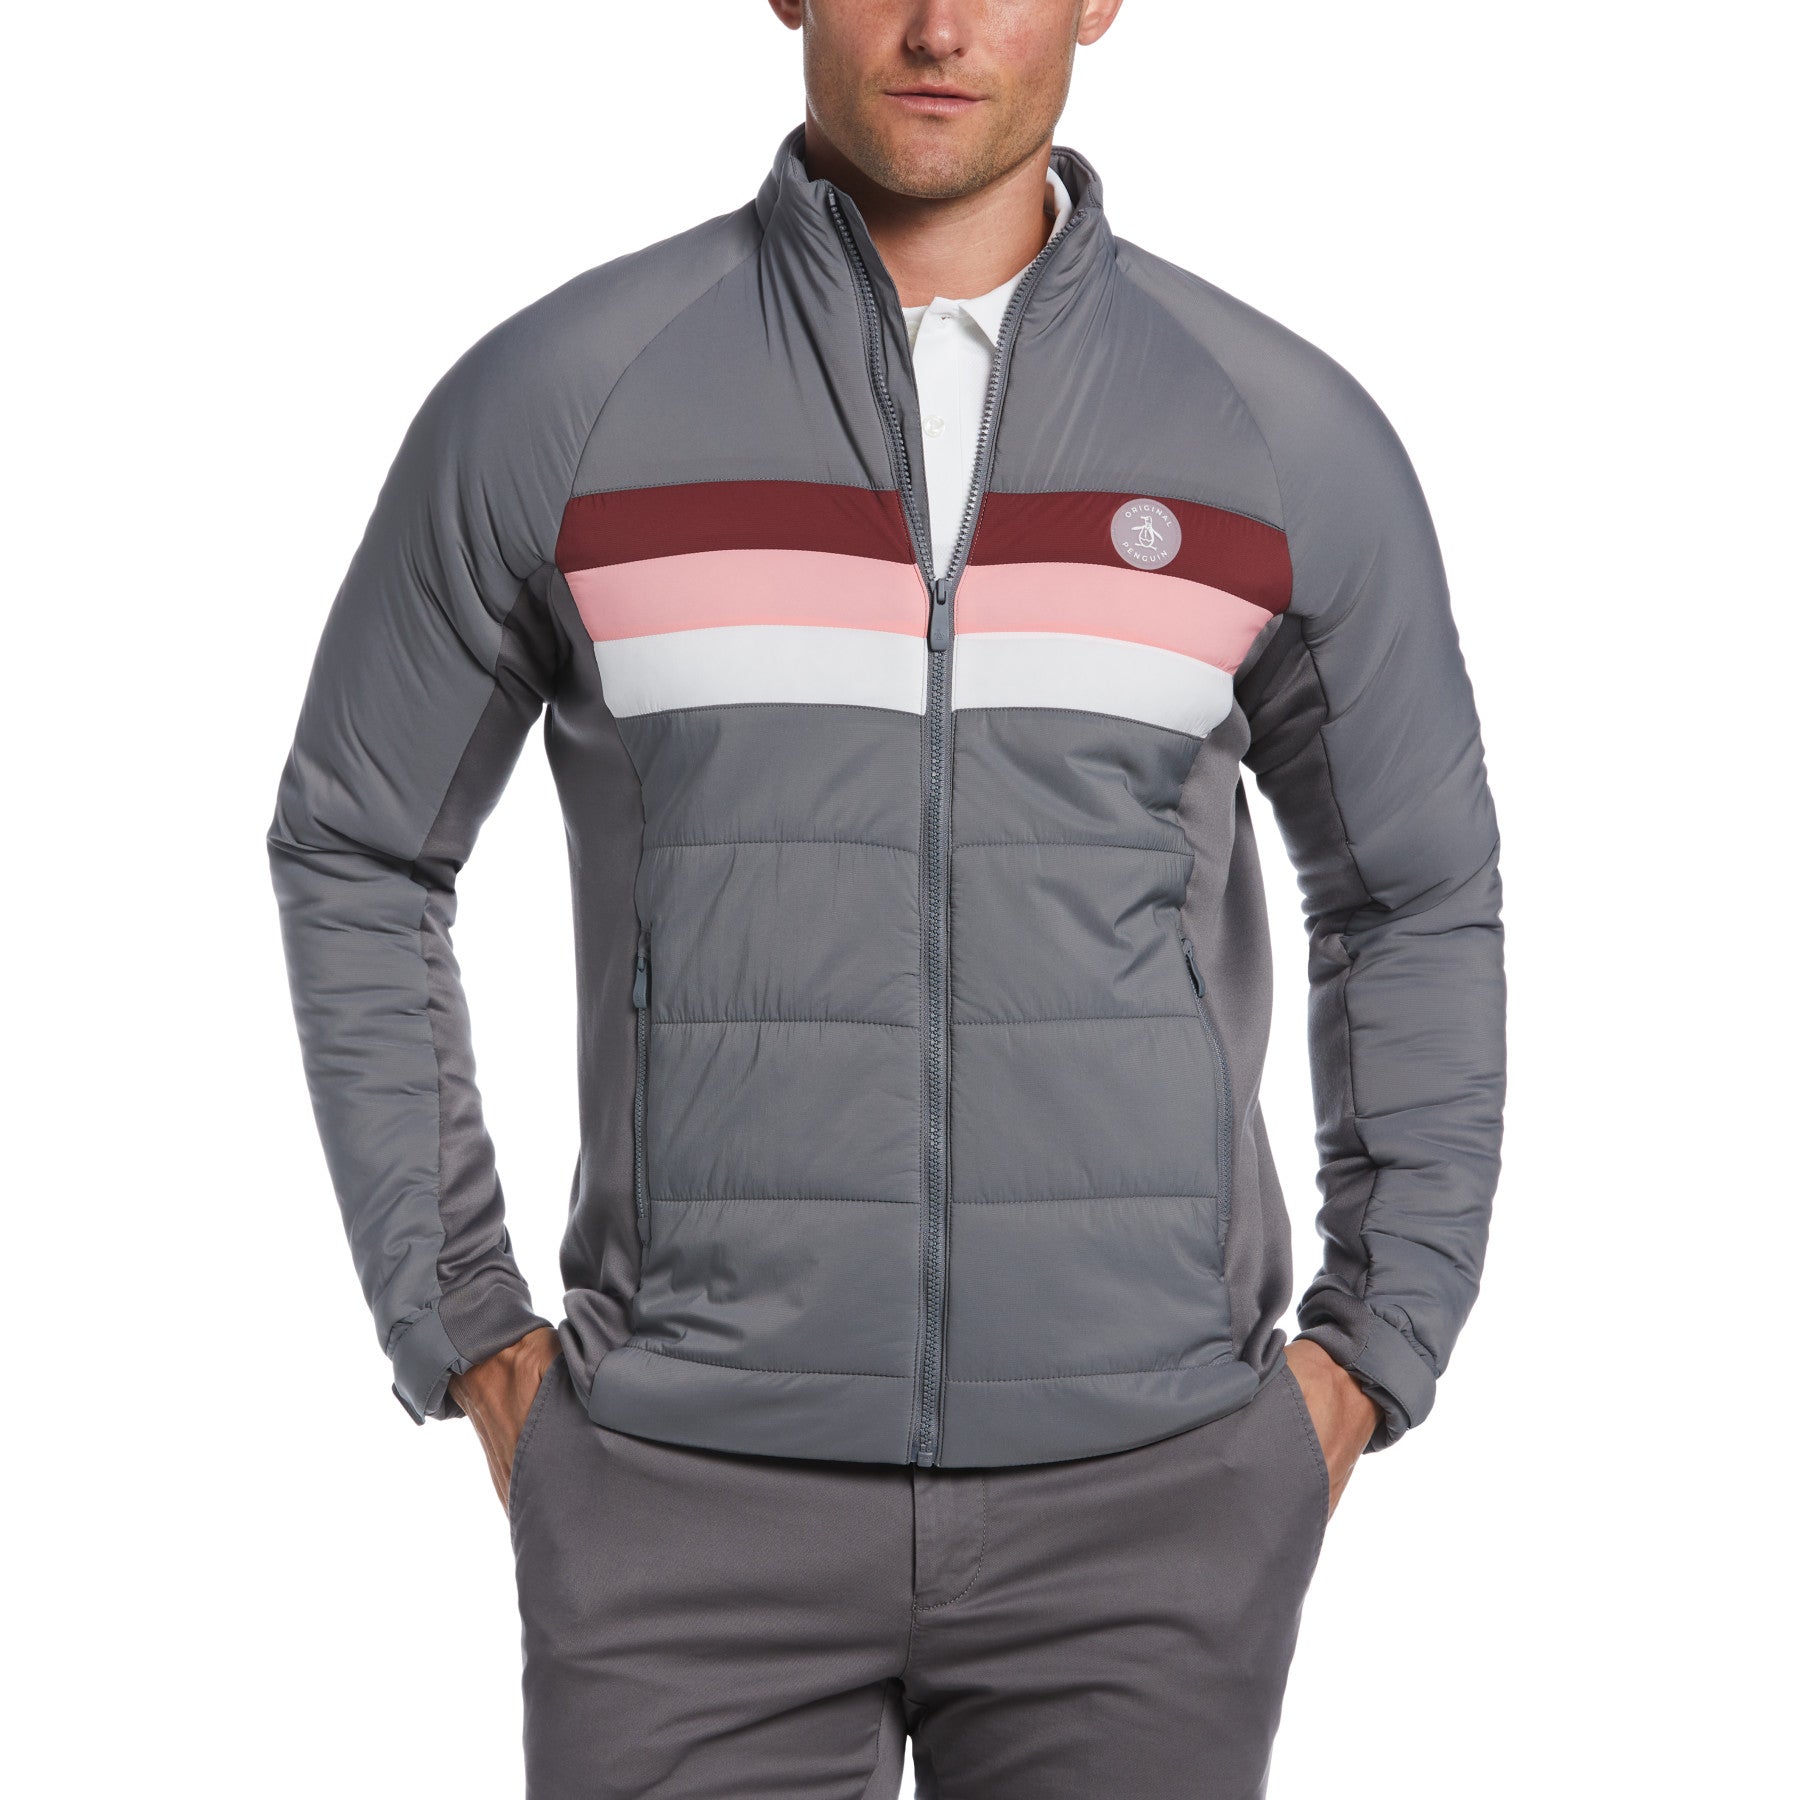 View Full Zip 70s Insulated Golf Jacket In Quiet Shade information